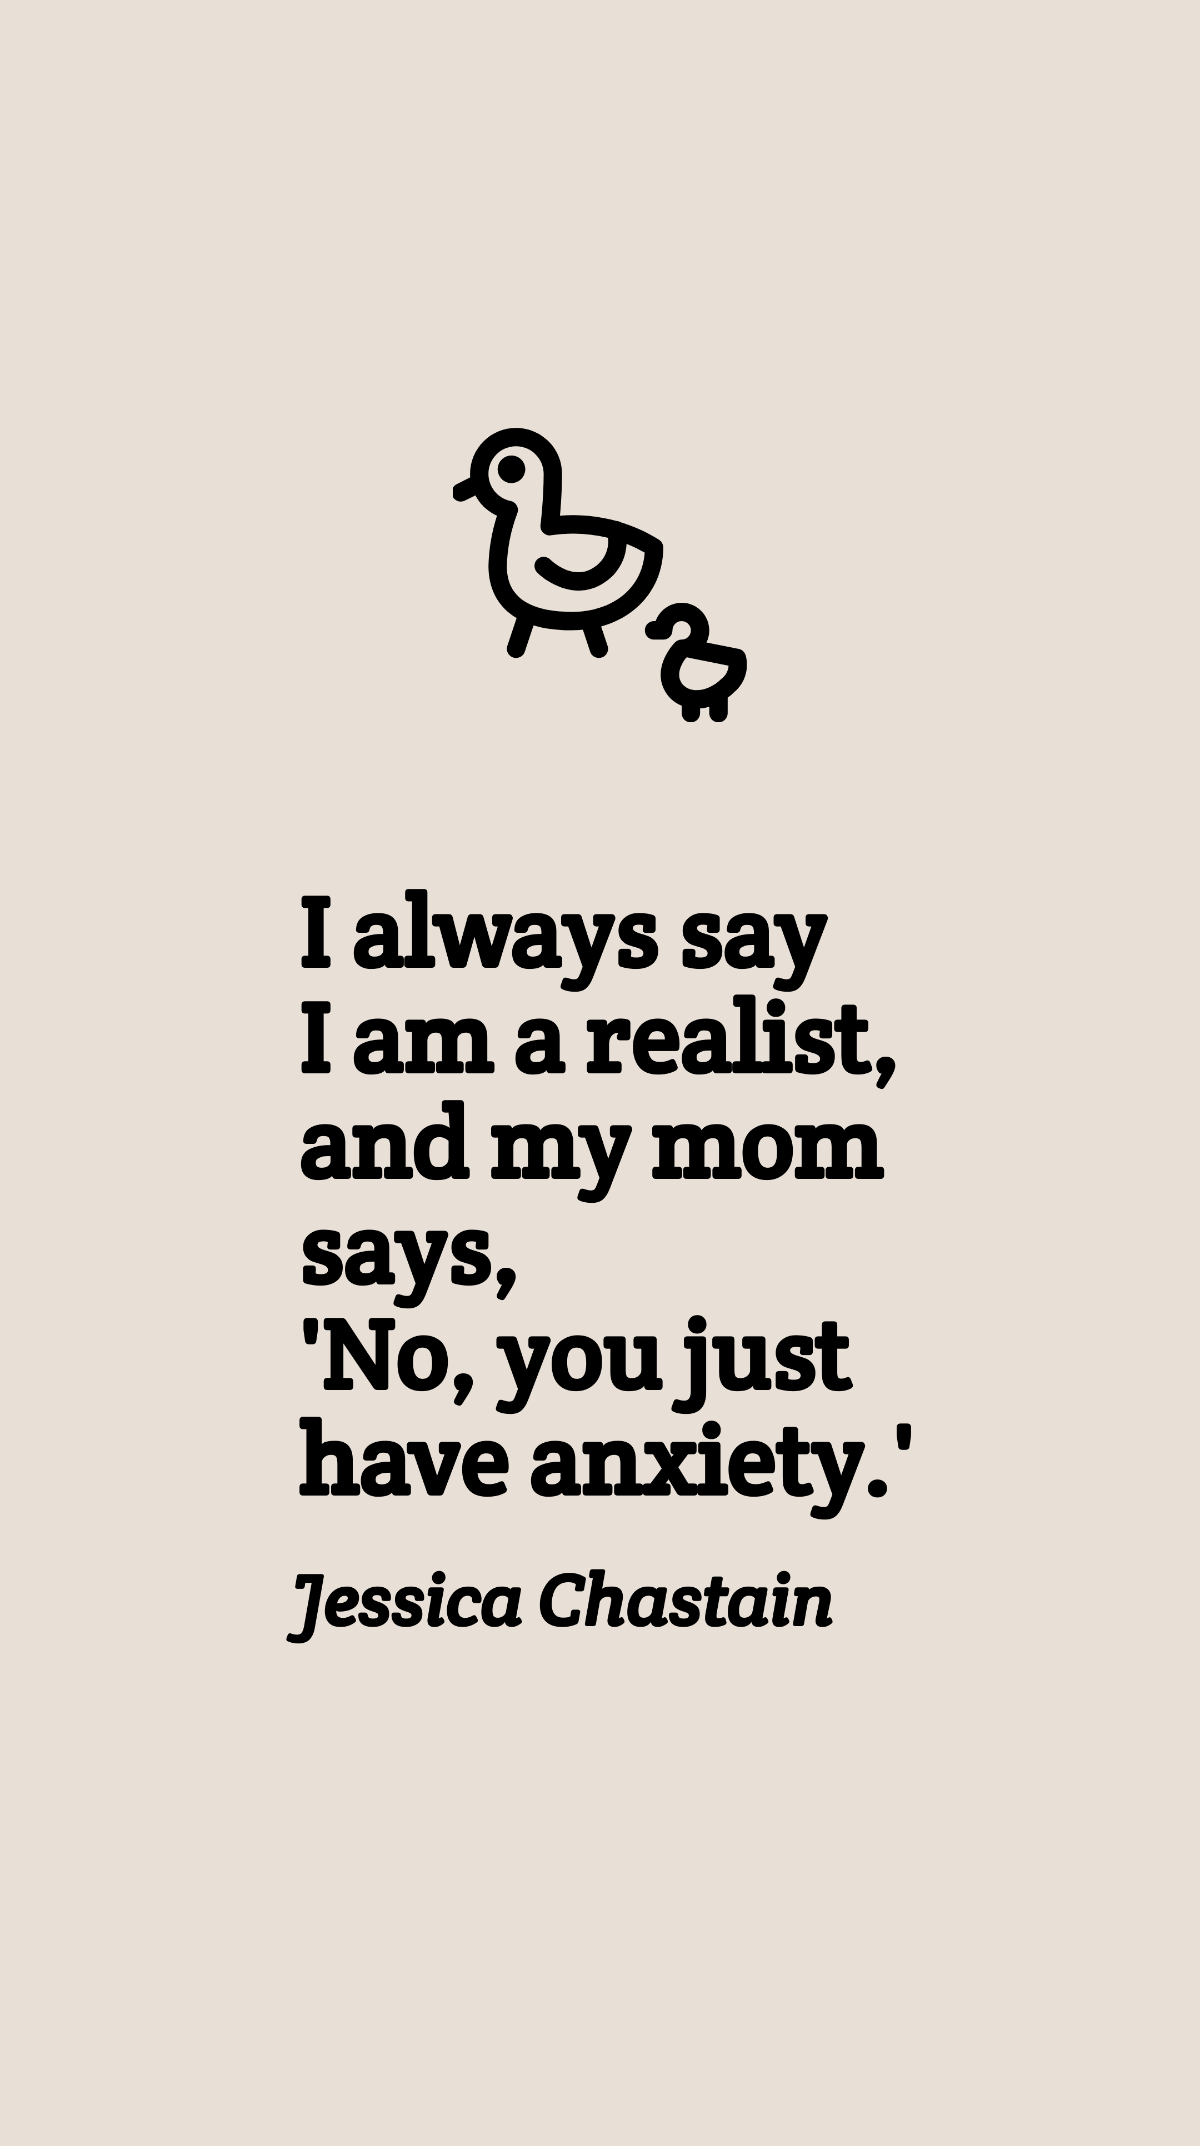 Jessica Chastain - I always say I am a realist, and my mom says, 'No, you just have anxiety.'